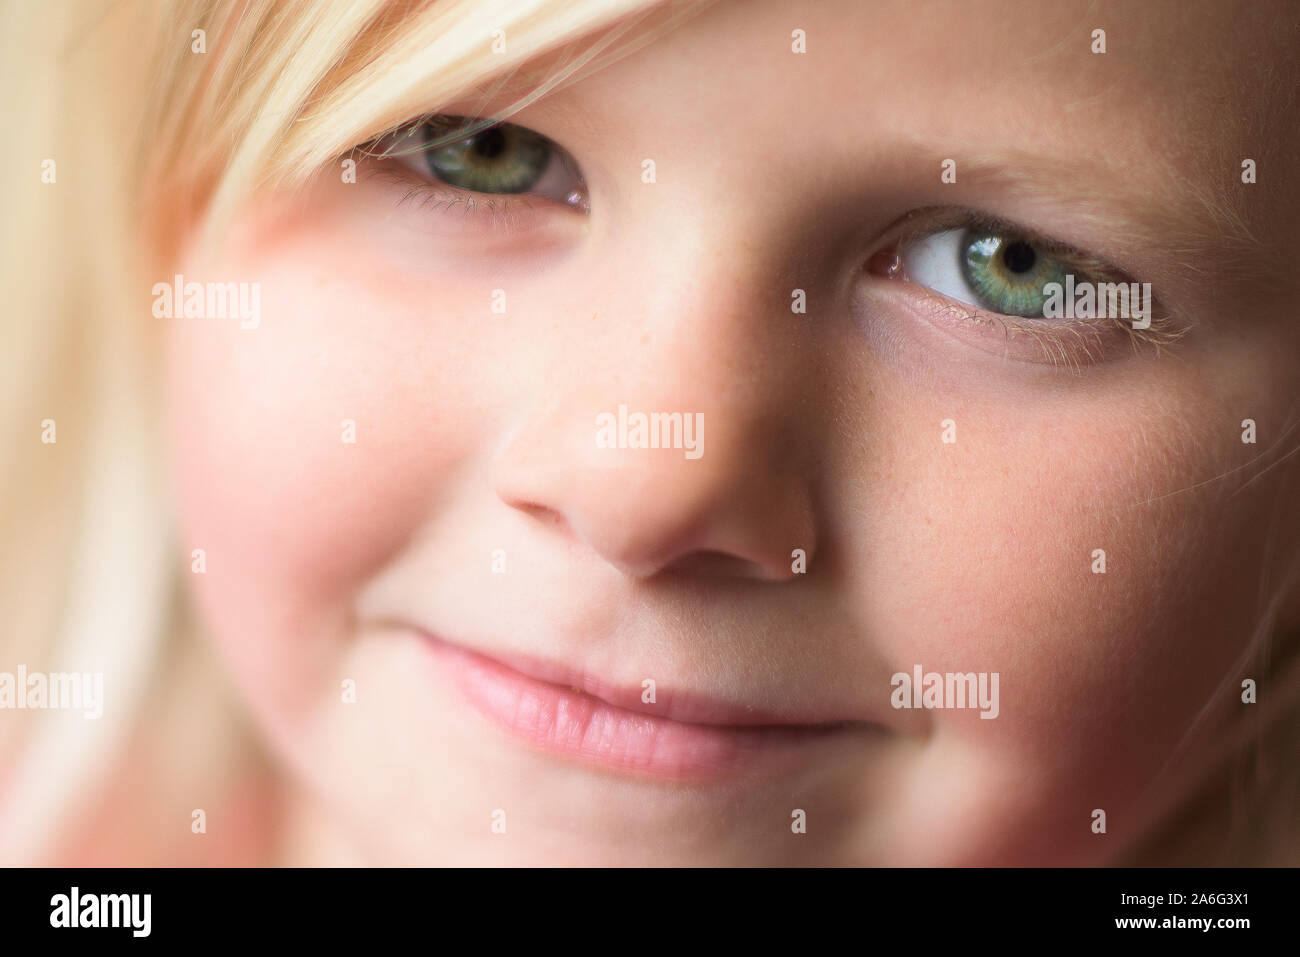 A beautiful little blonde girl with bright green eyes smiling into the camera, close up Stock Photo